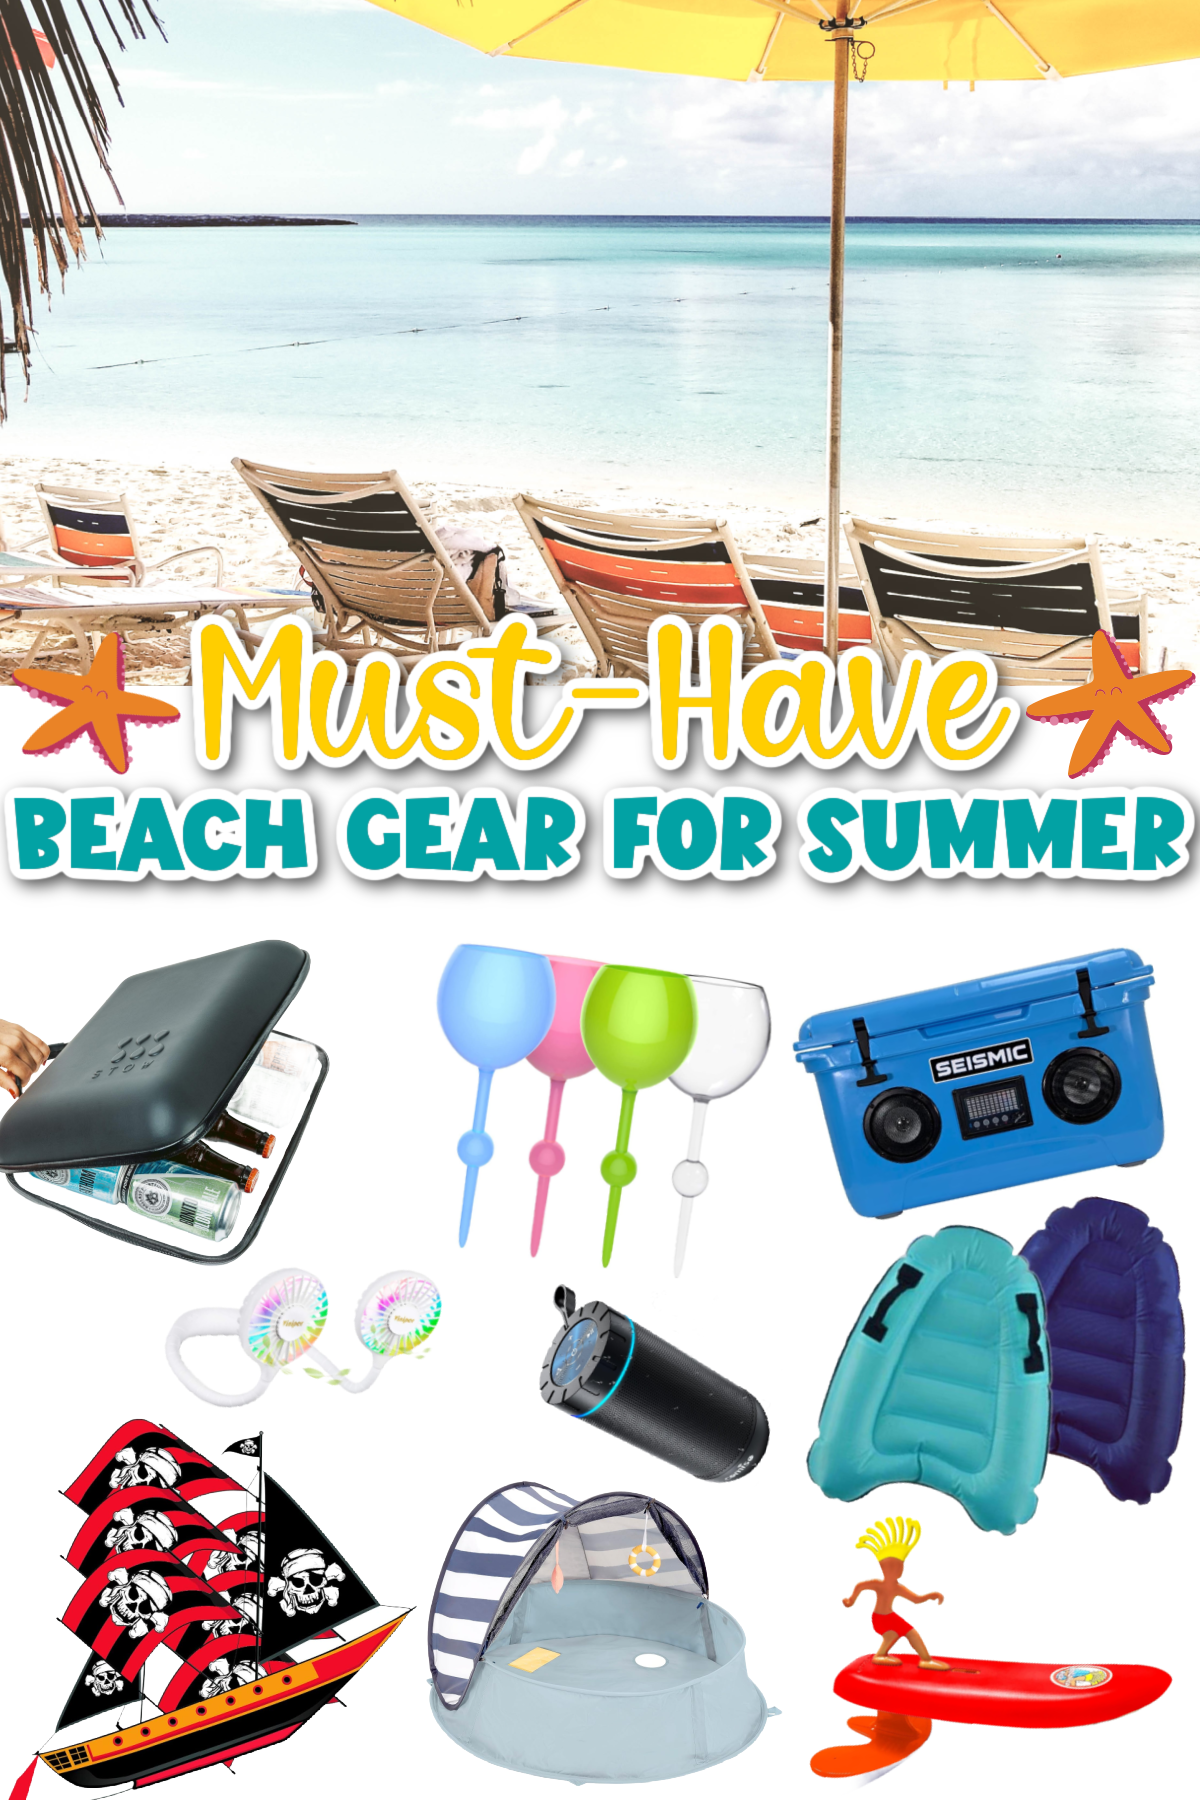 Promotional collage of various beach gear items for summer, with a tropical beach backdrop.